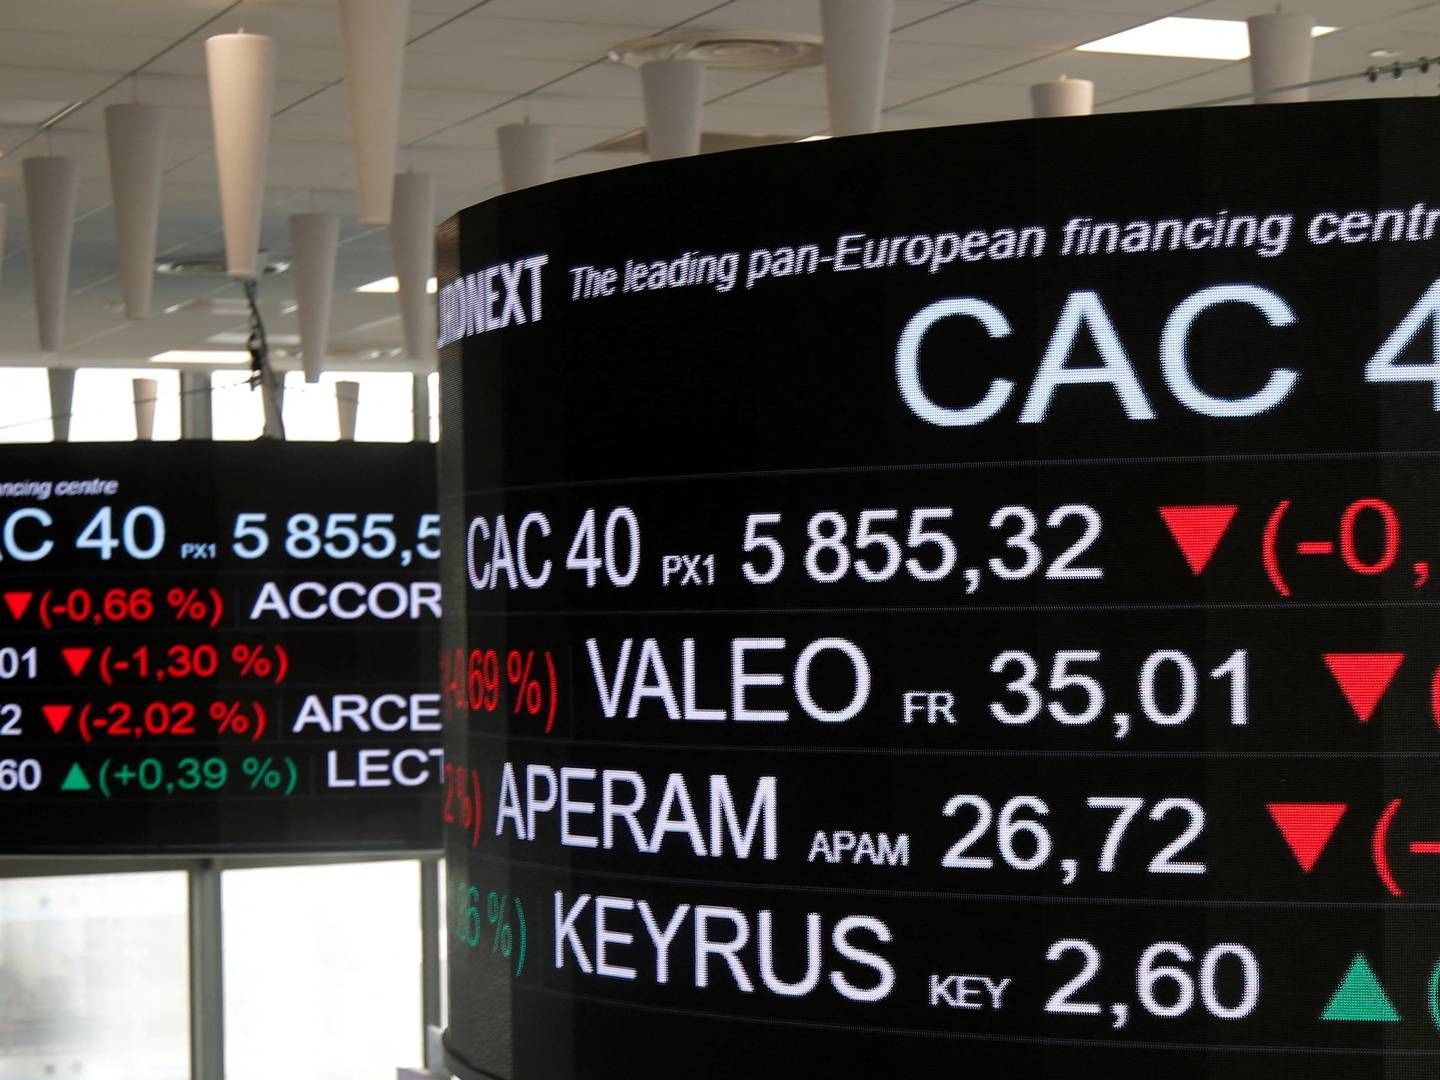 Company stock price information is displayed on screens as they hang above the market services surveillance room center at the Euronext headquarters. | Photo: Charles Platiau/Reuters/Ritzau Scanpix